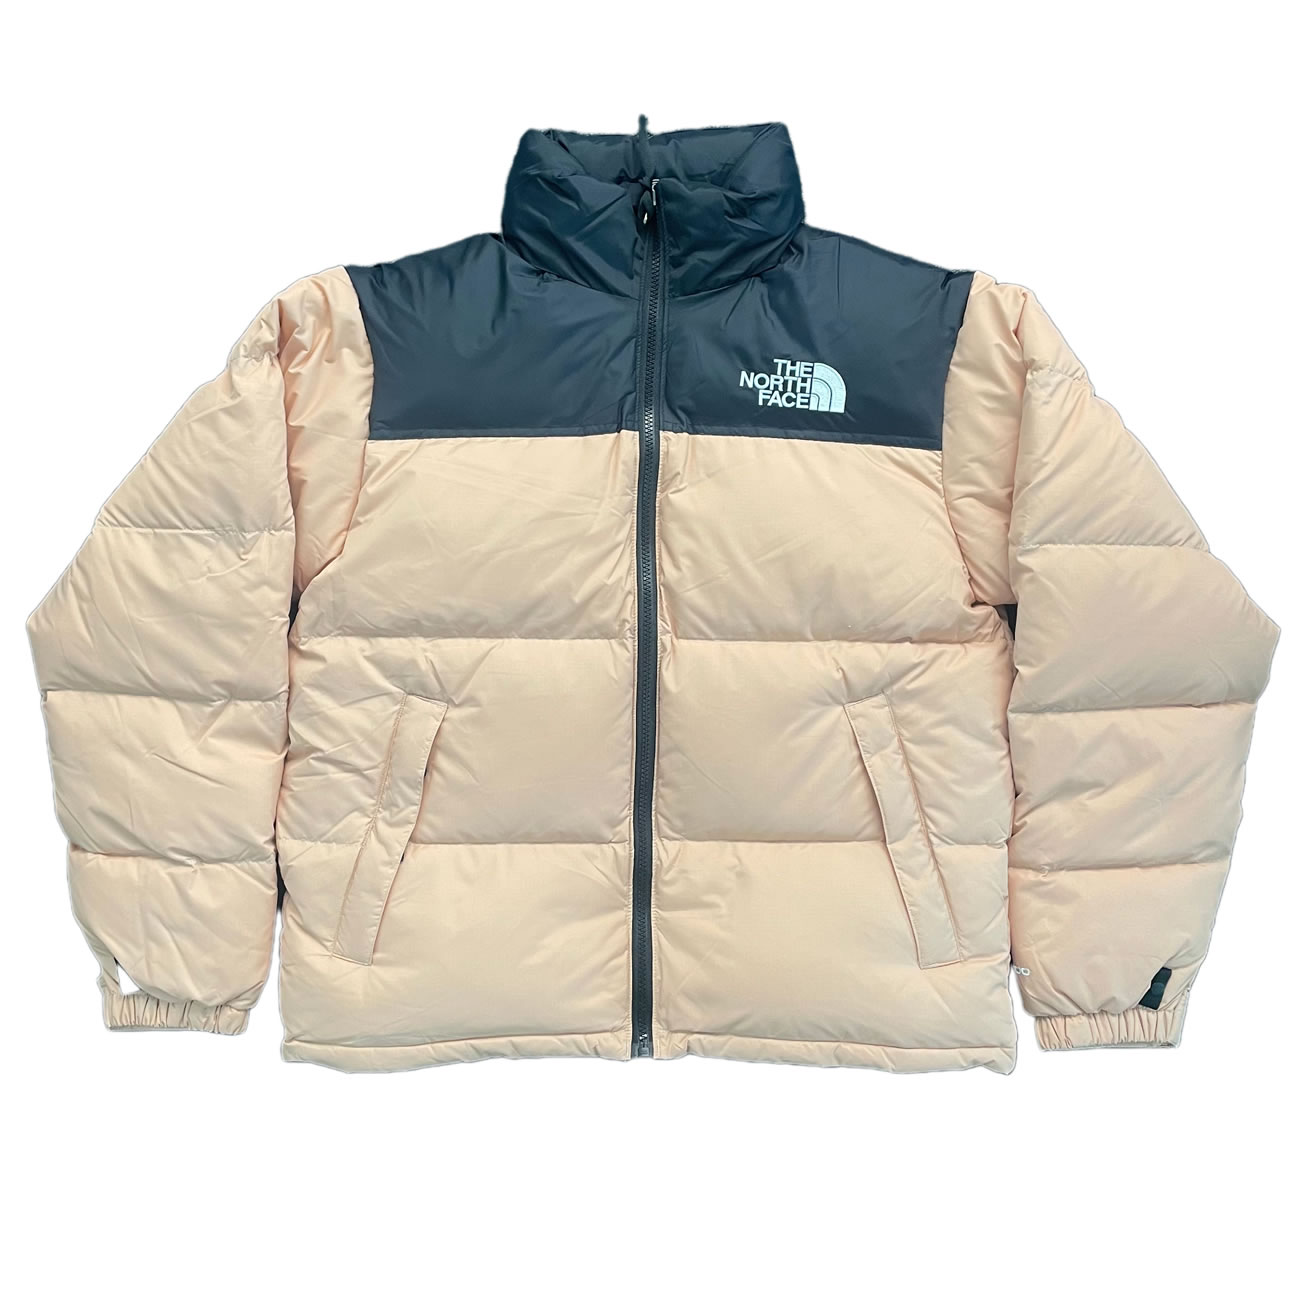 The North Face 1996 Retro Nuptse Packable Jacket Fw21 (17) - newkick.org